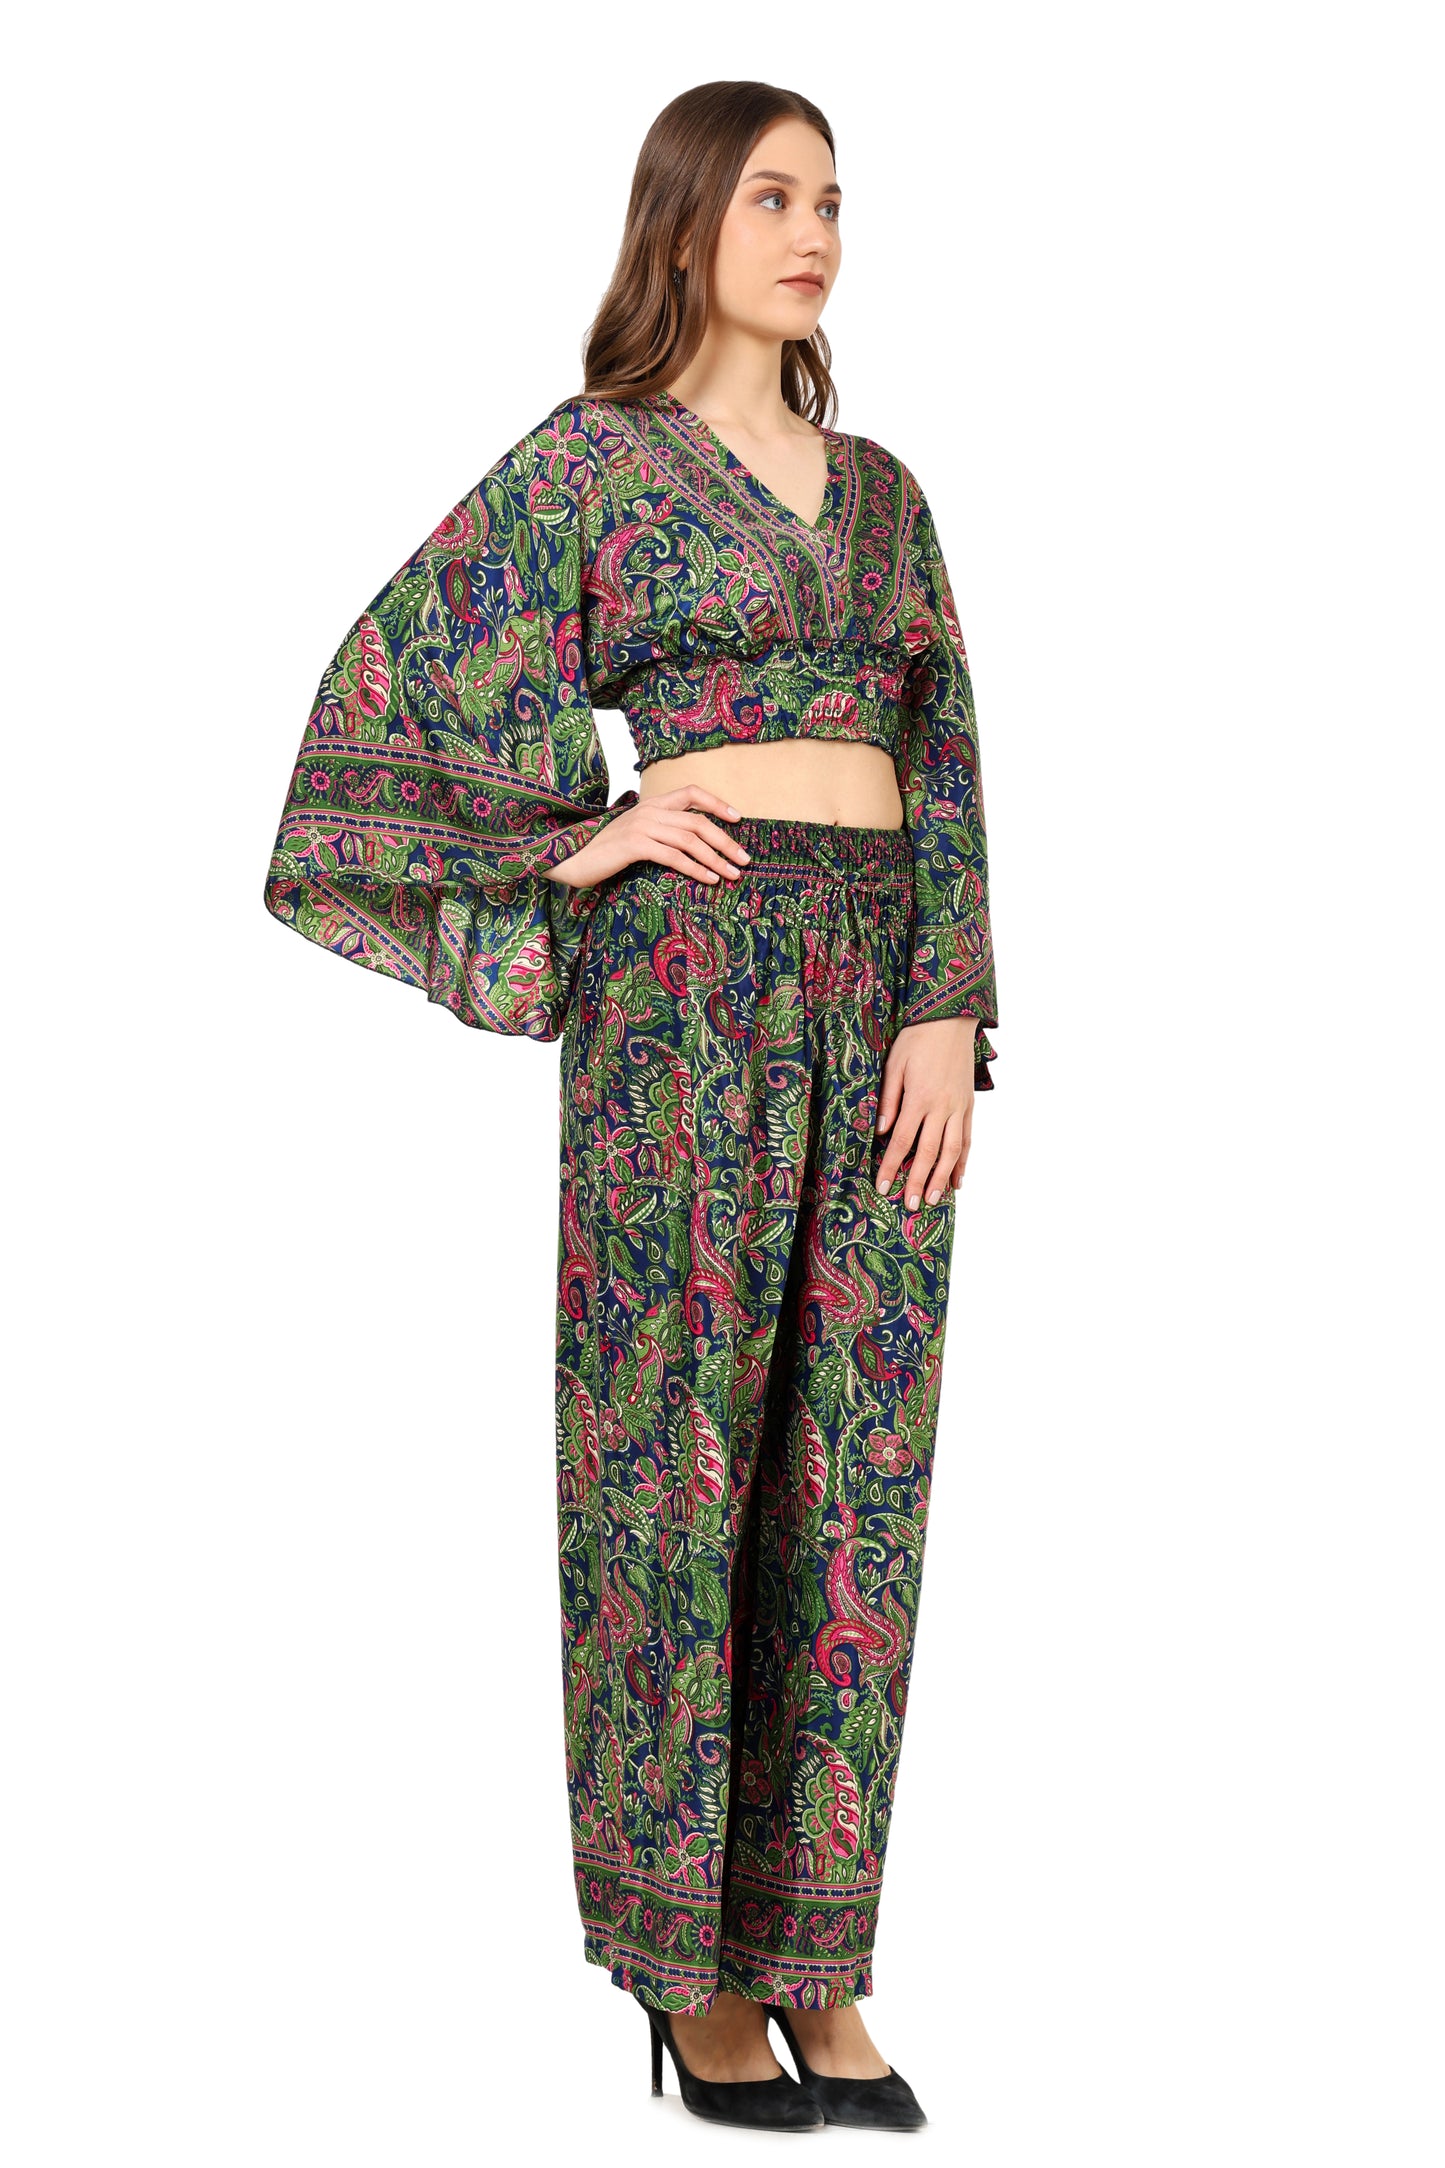 Yash Gallery Women's Green Floral Printed Smoking Embroidered Co-Ord Set (Green)